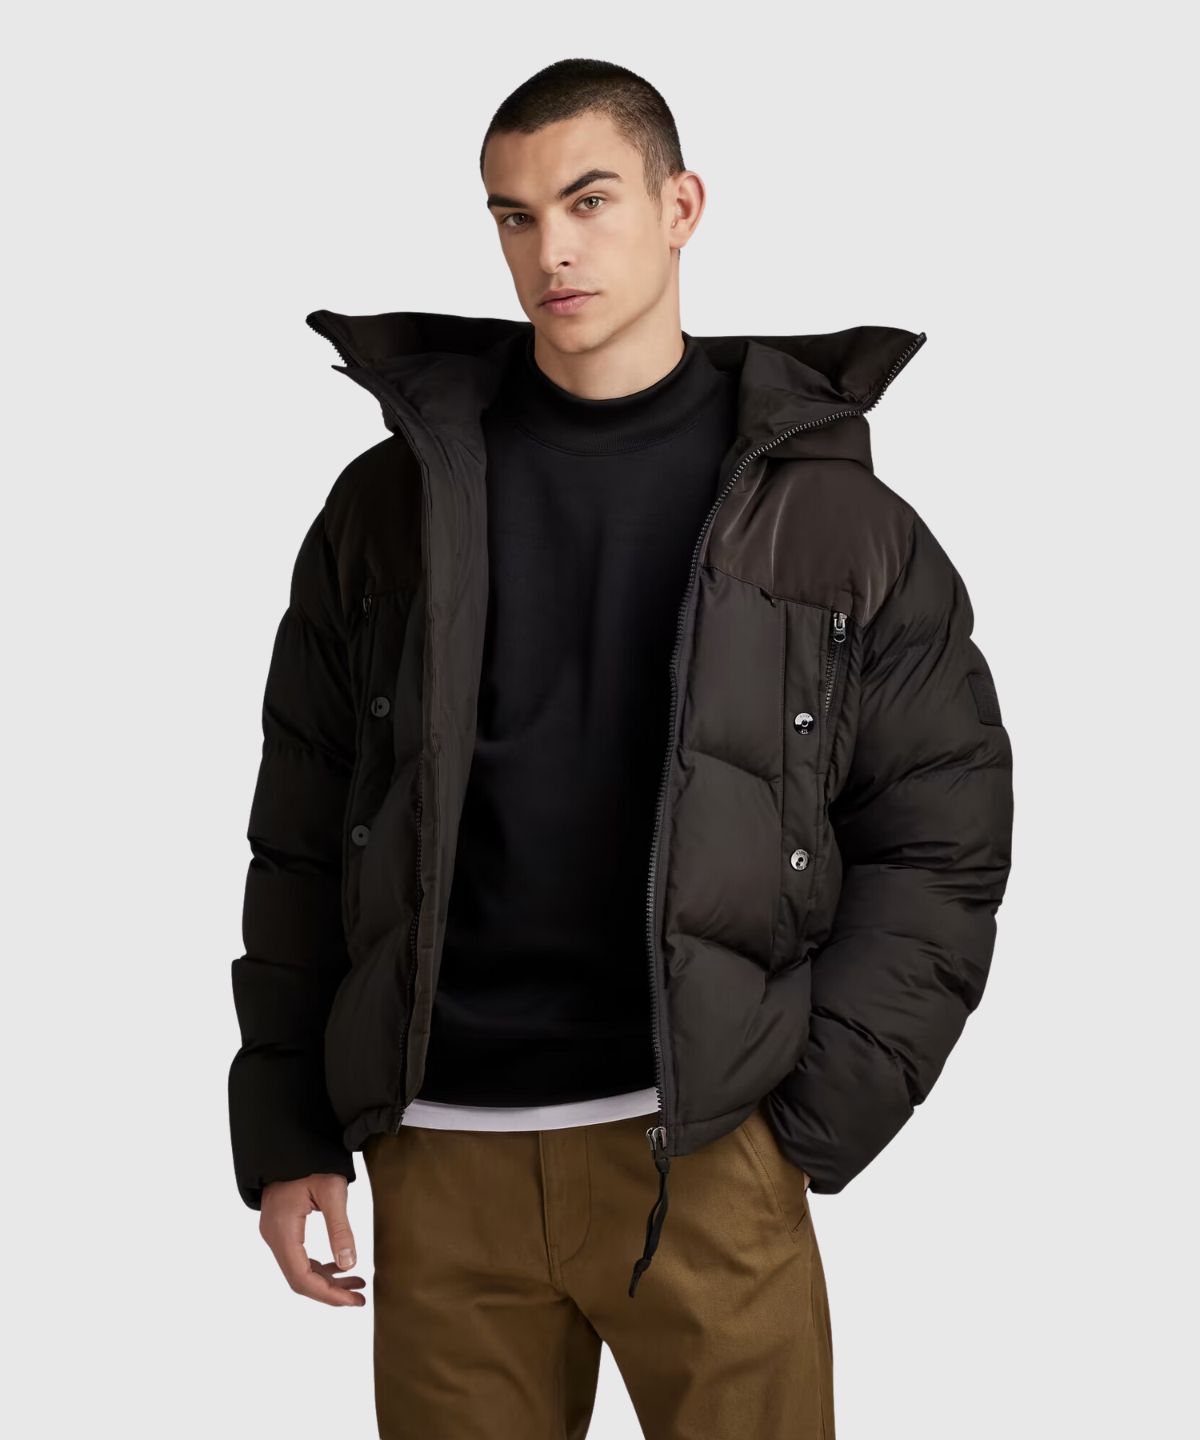 Expedition puffer - Maxx Group